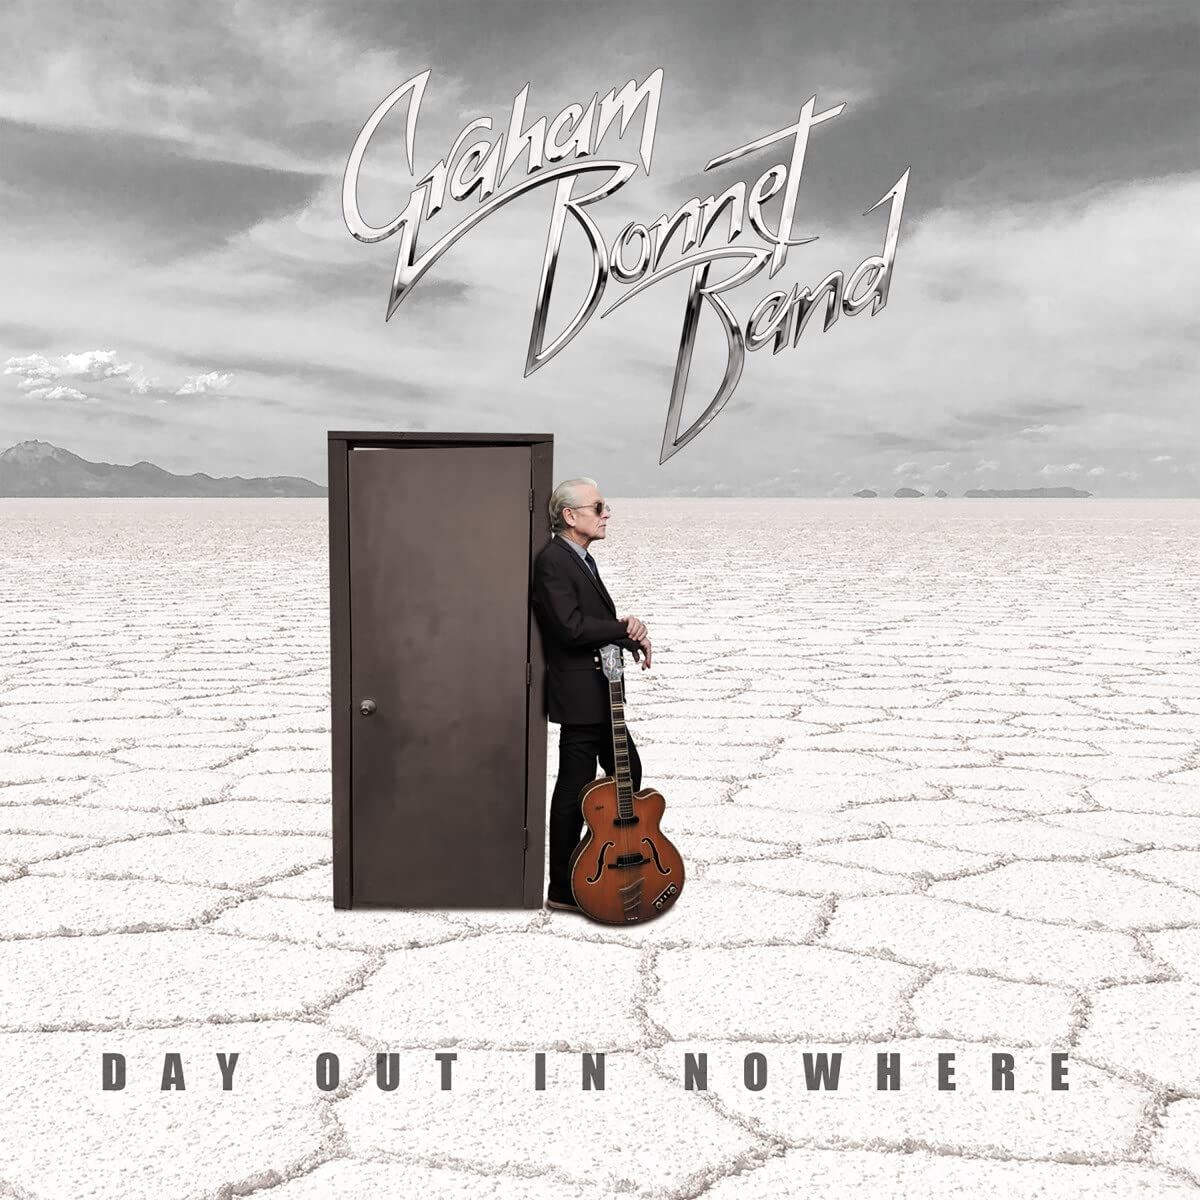 Bonnet, Graham - Day Out In Nowhere - CD - New